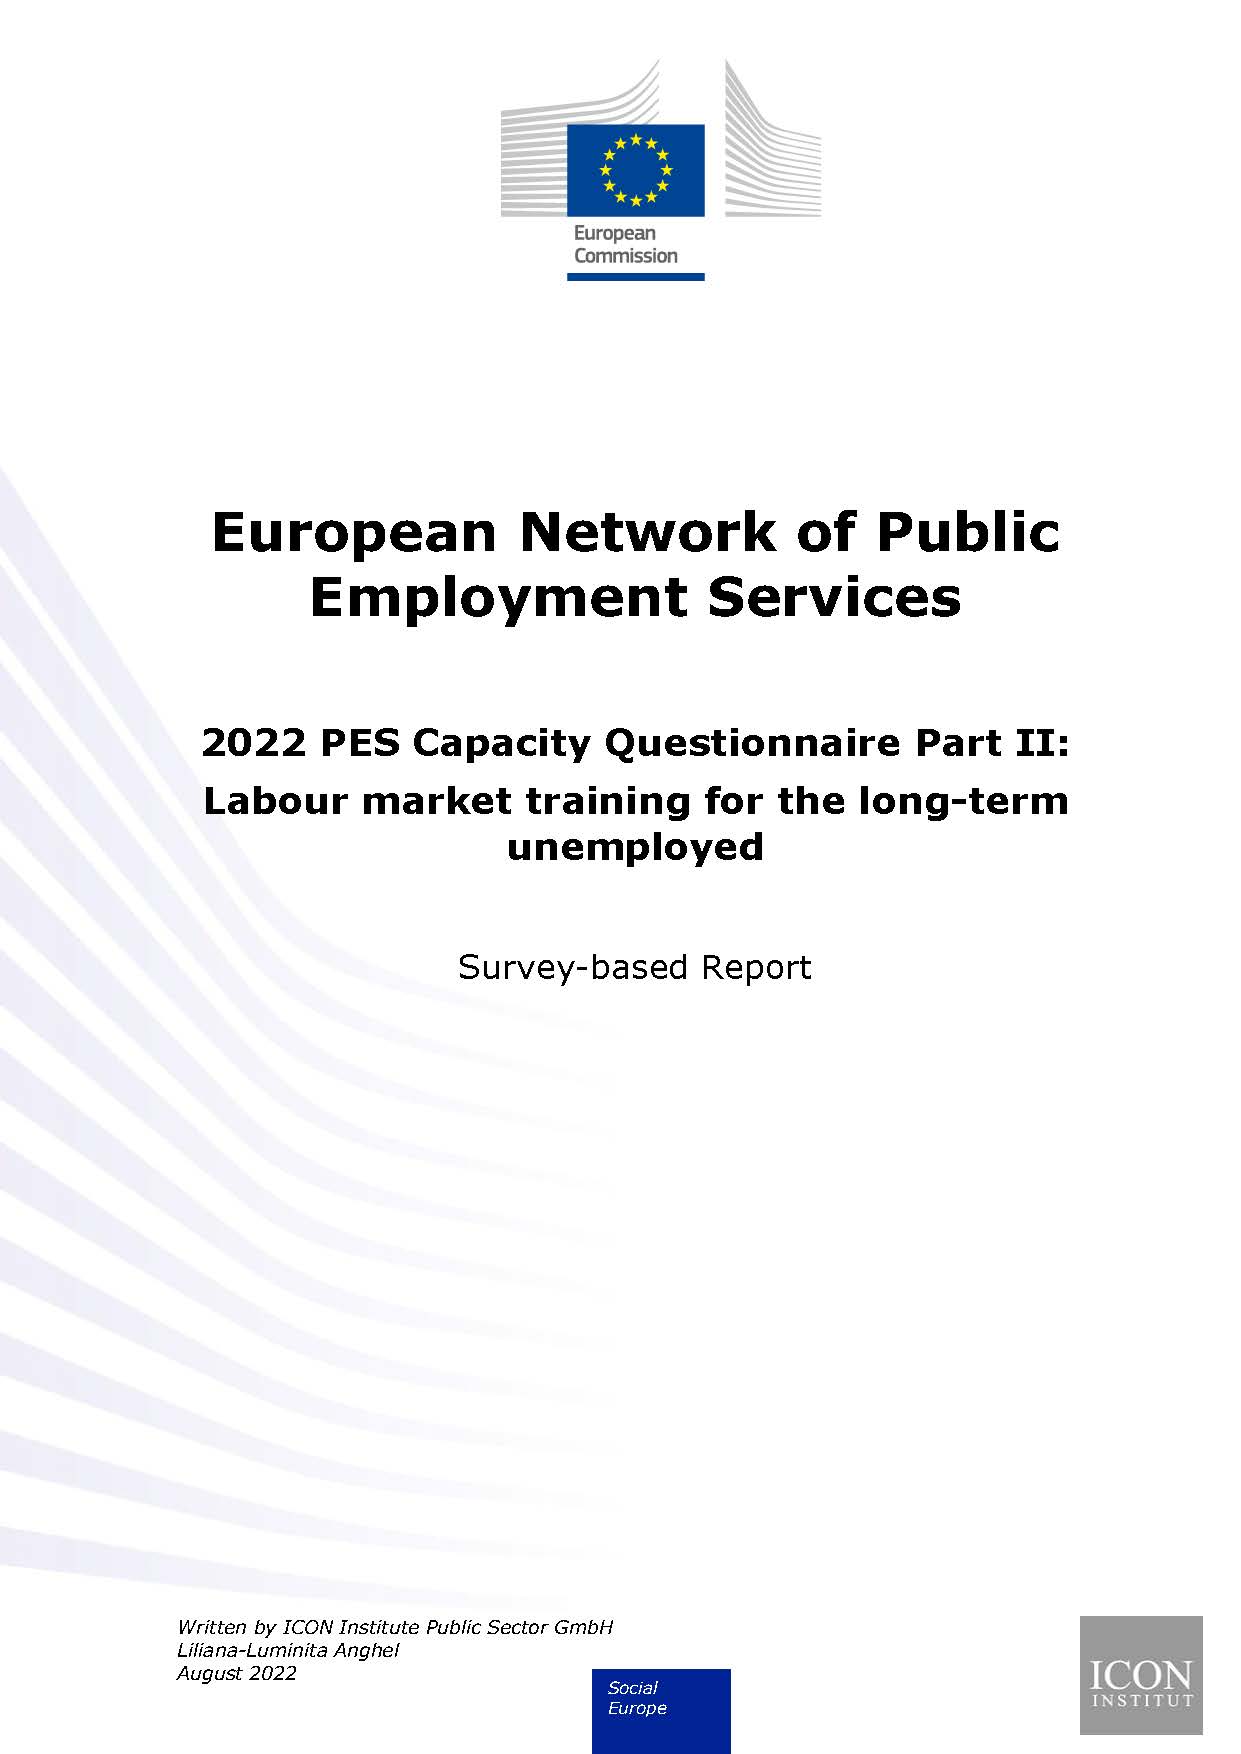 Labour market training for the long-term unemployed (PES capacity Report 2022 Part II)